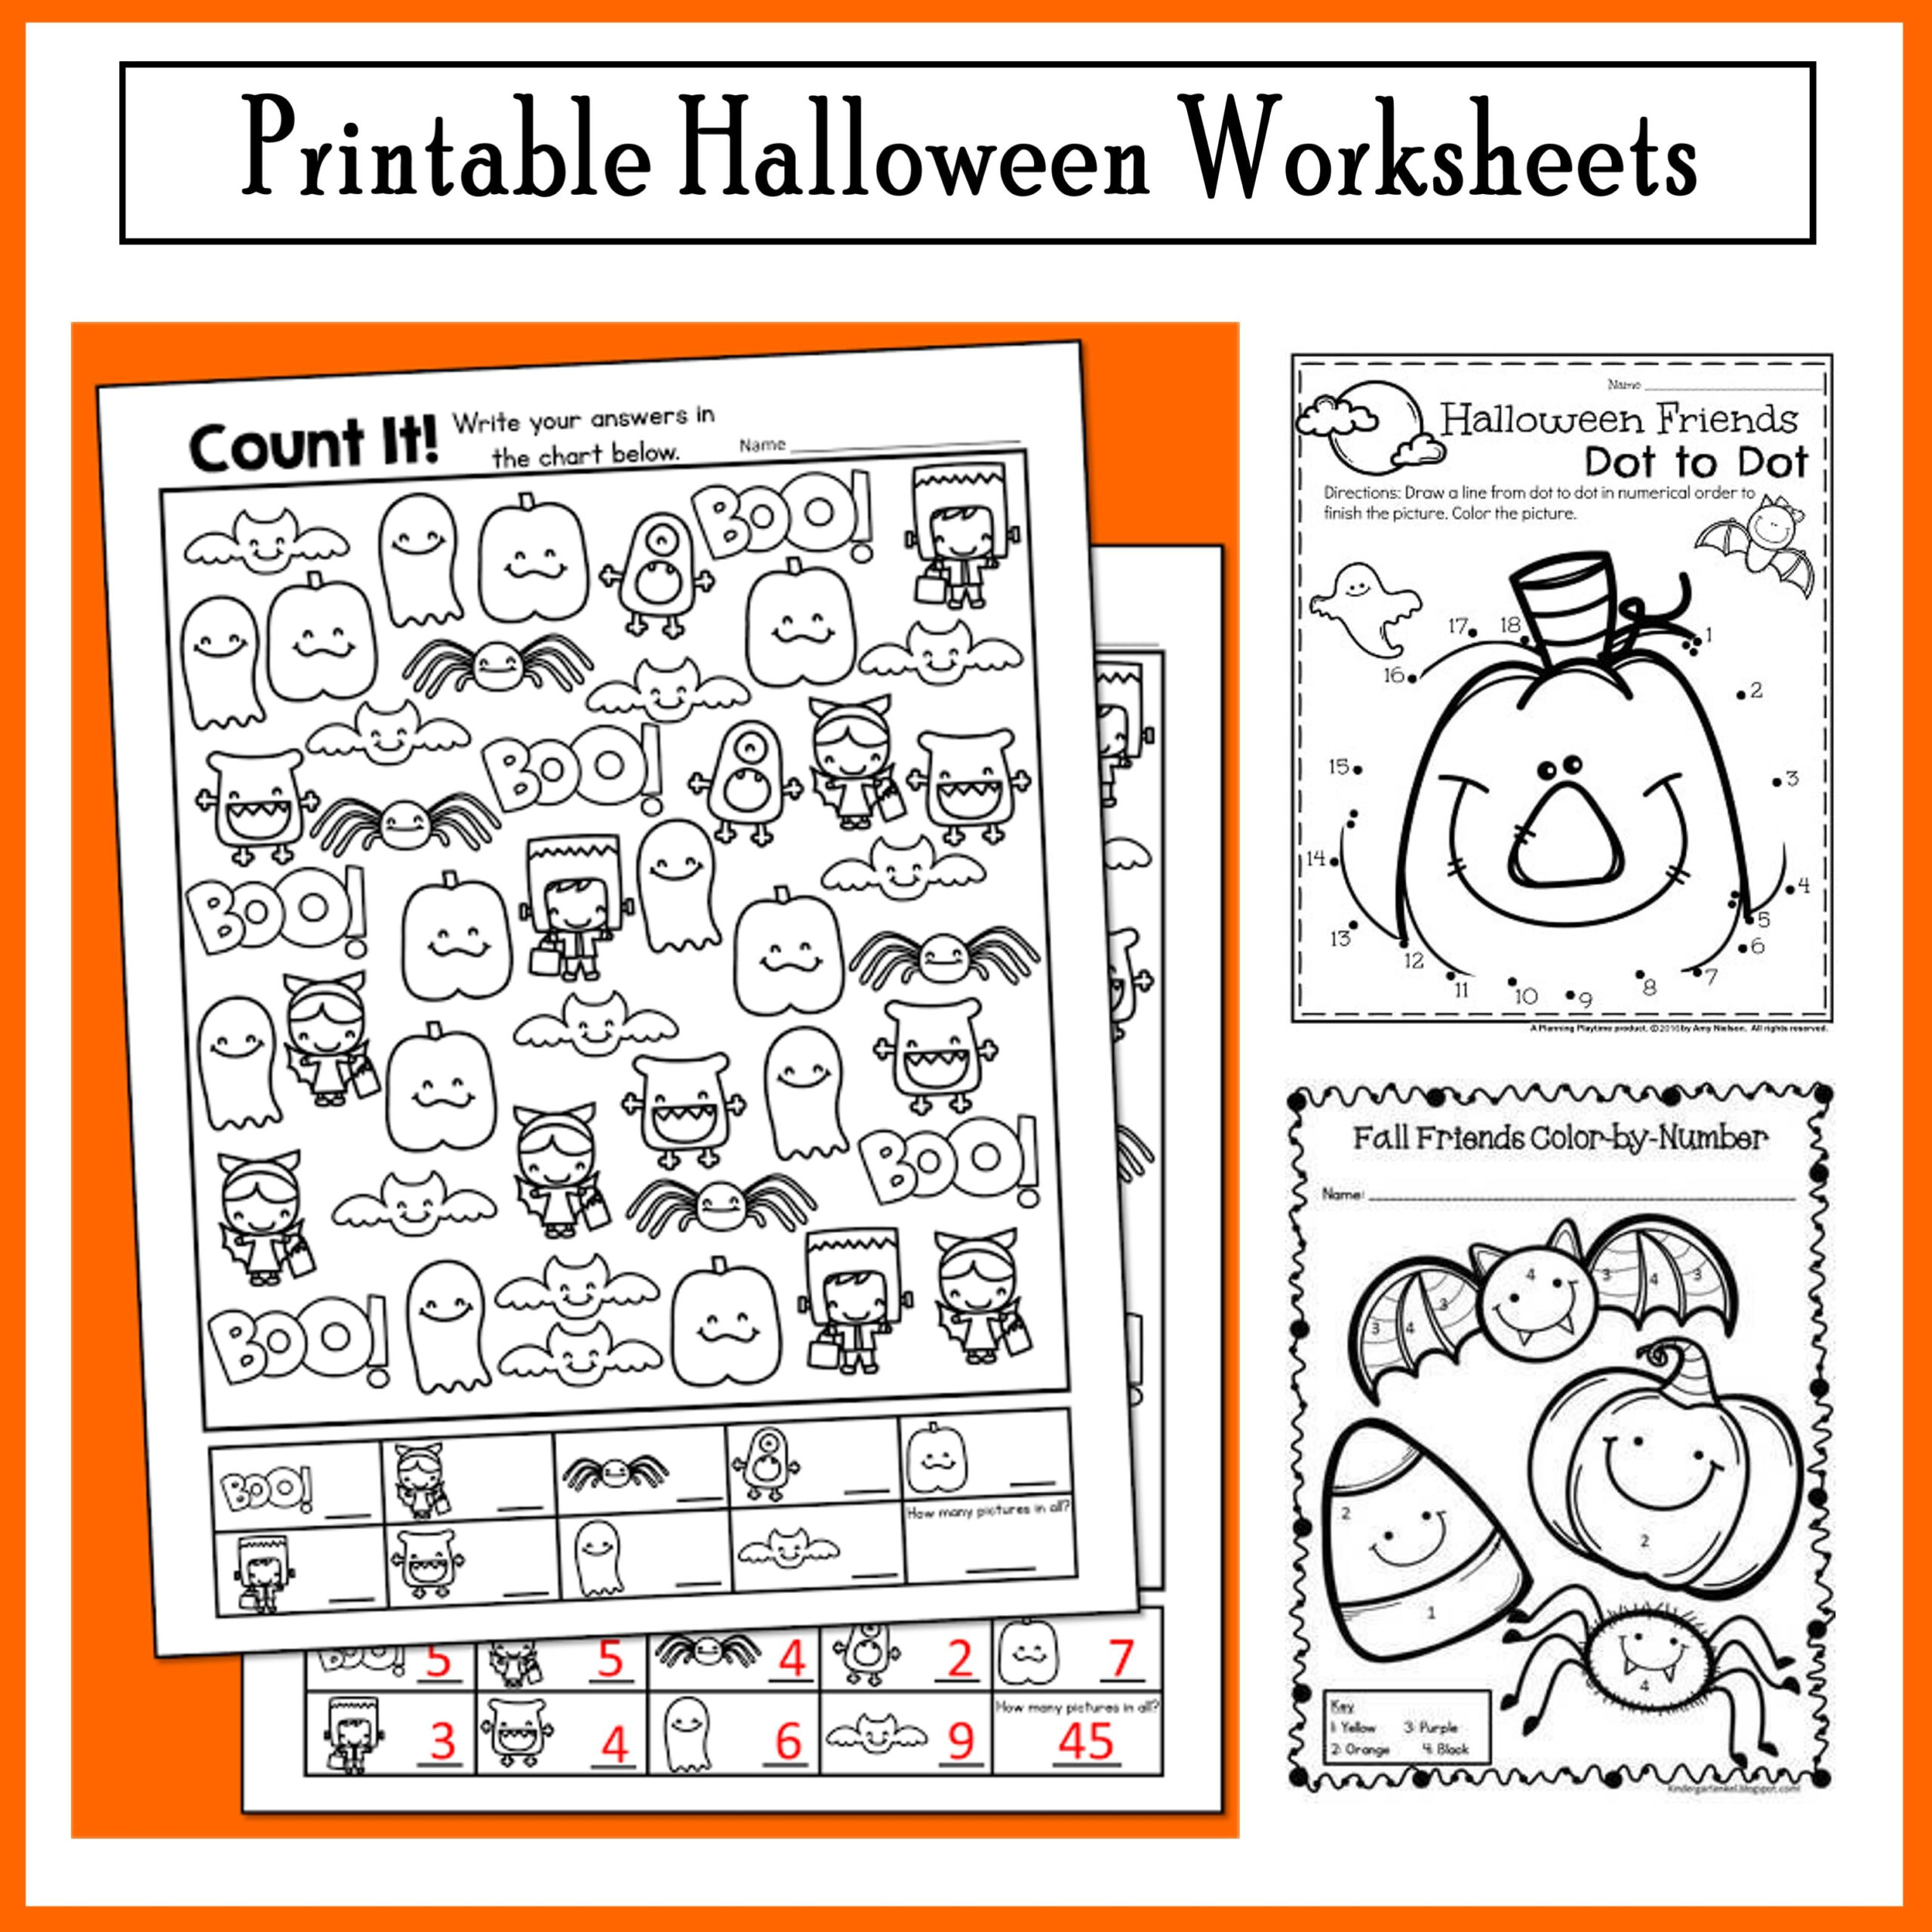 Looking For Some Fun, Halloween Activities For Your Pre-K